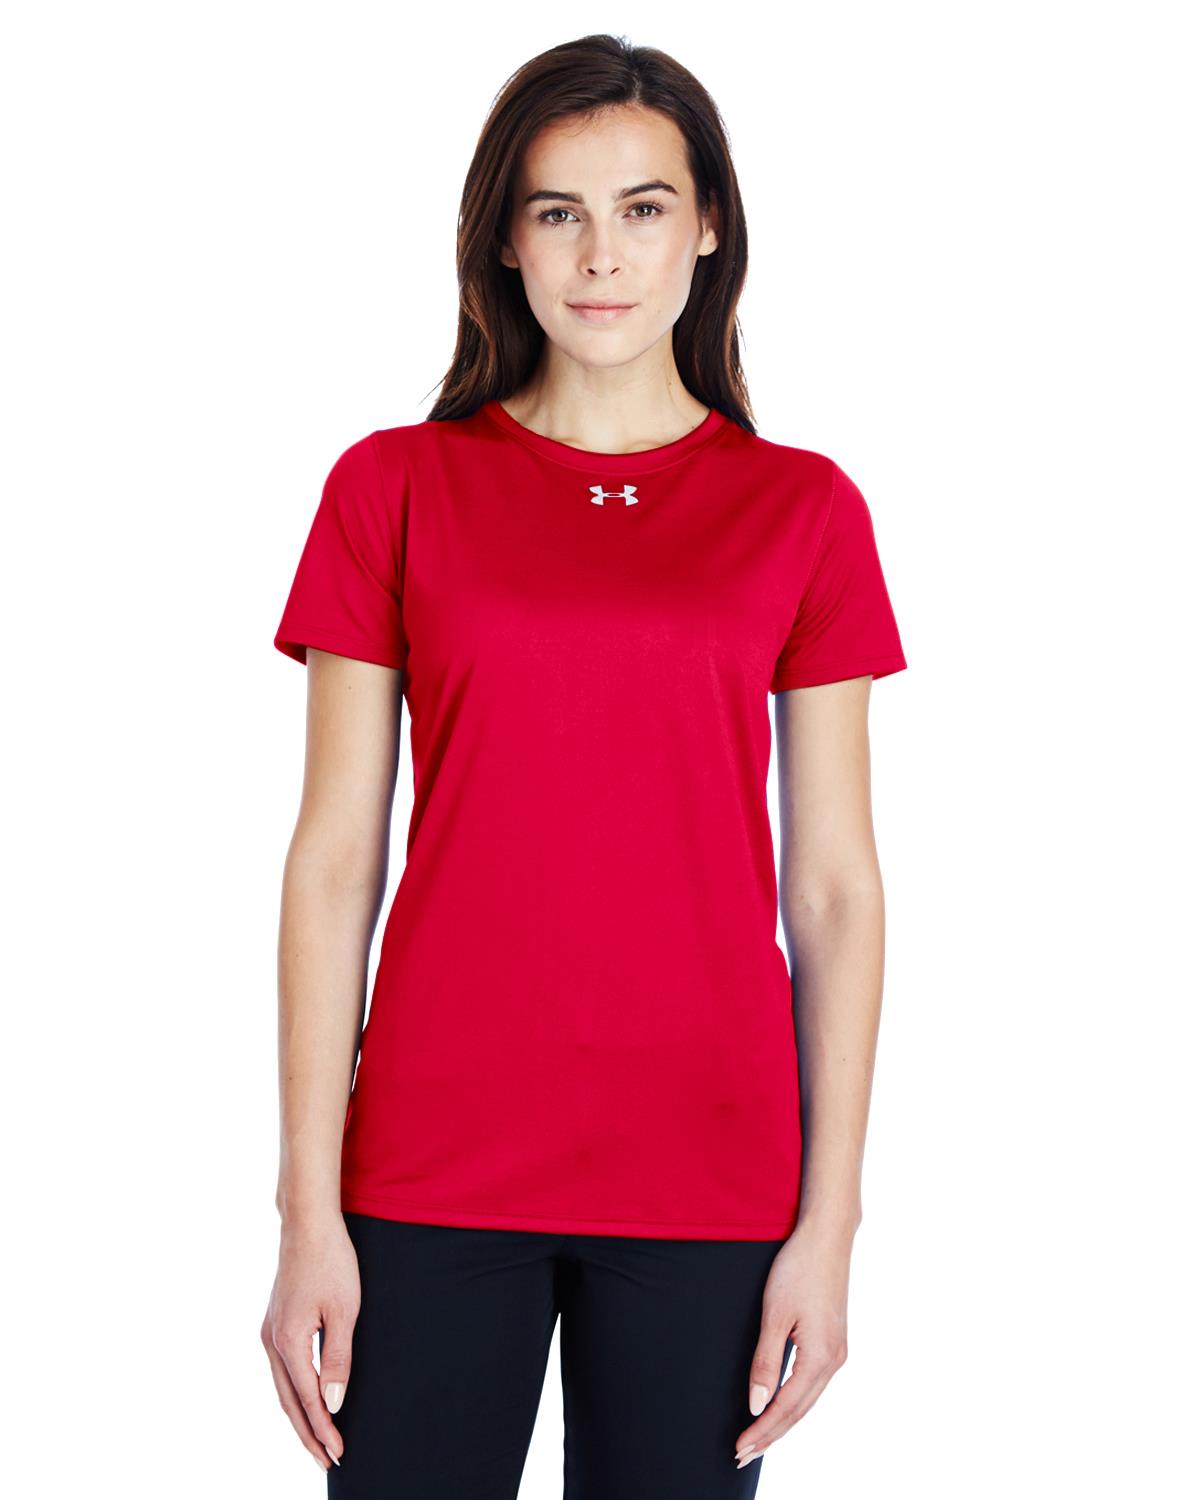 Size Chart for Under Armour 1305510 Ladies Locker T-Shirt - A2ZClothing.com